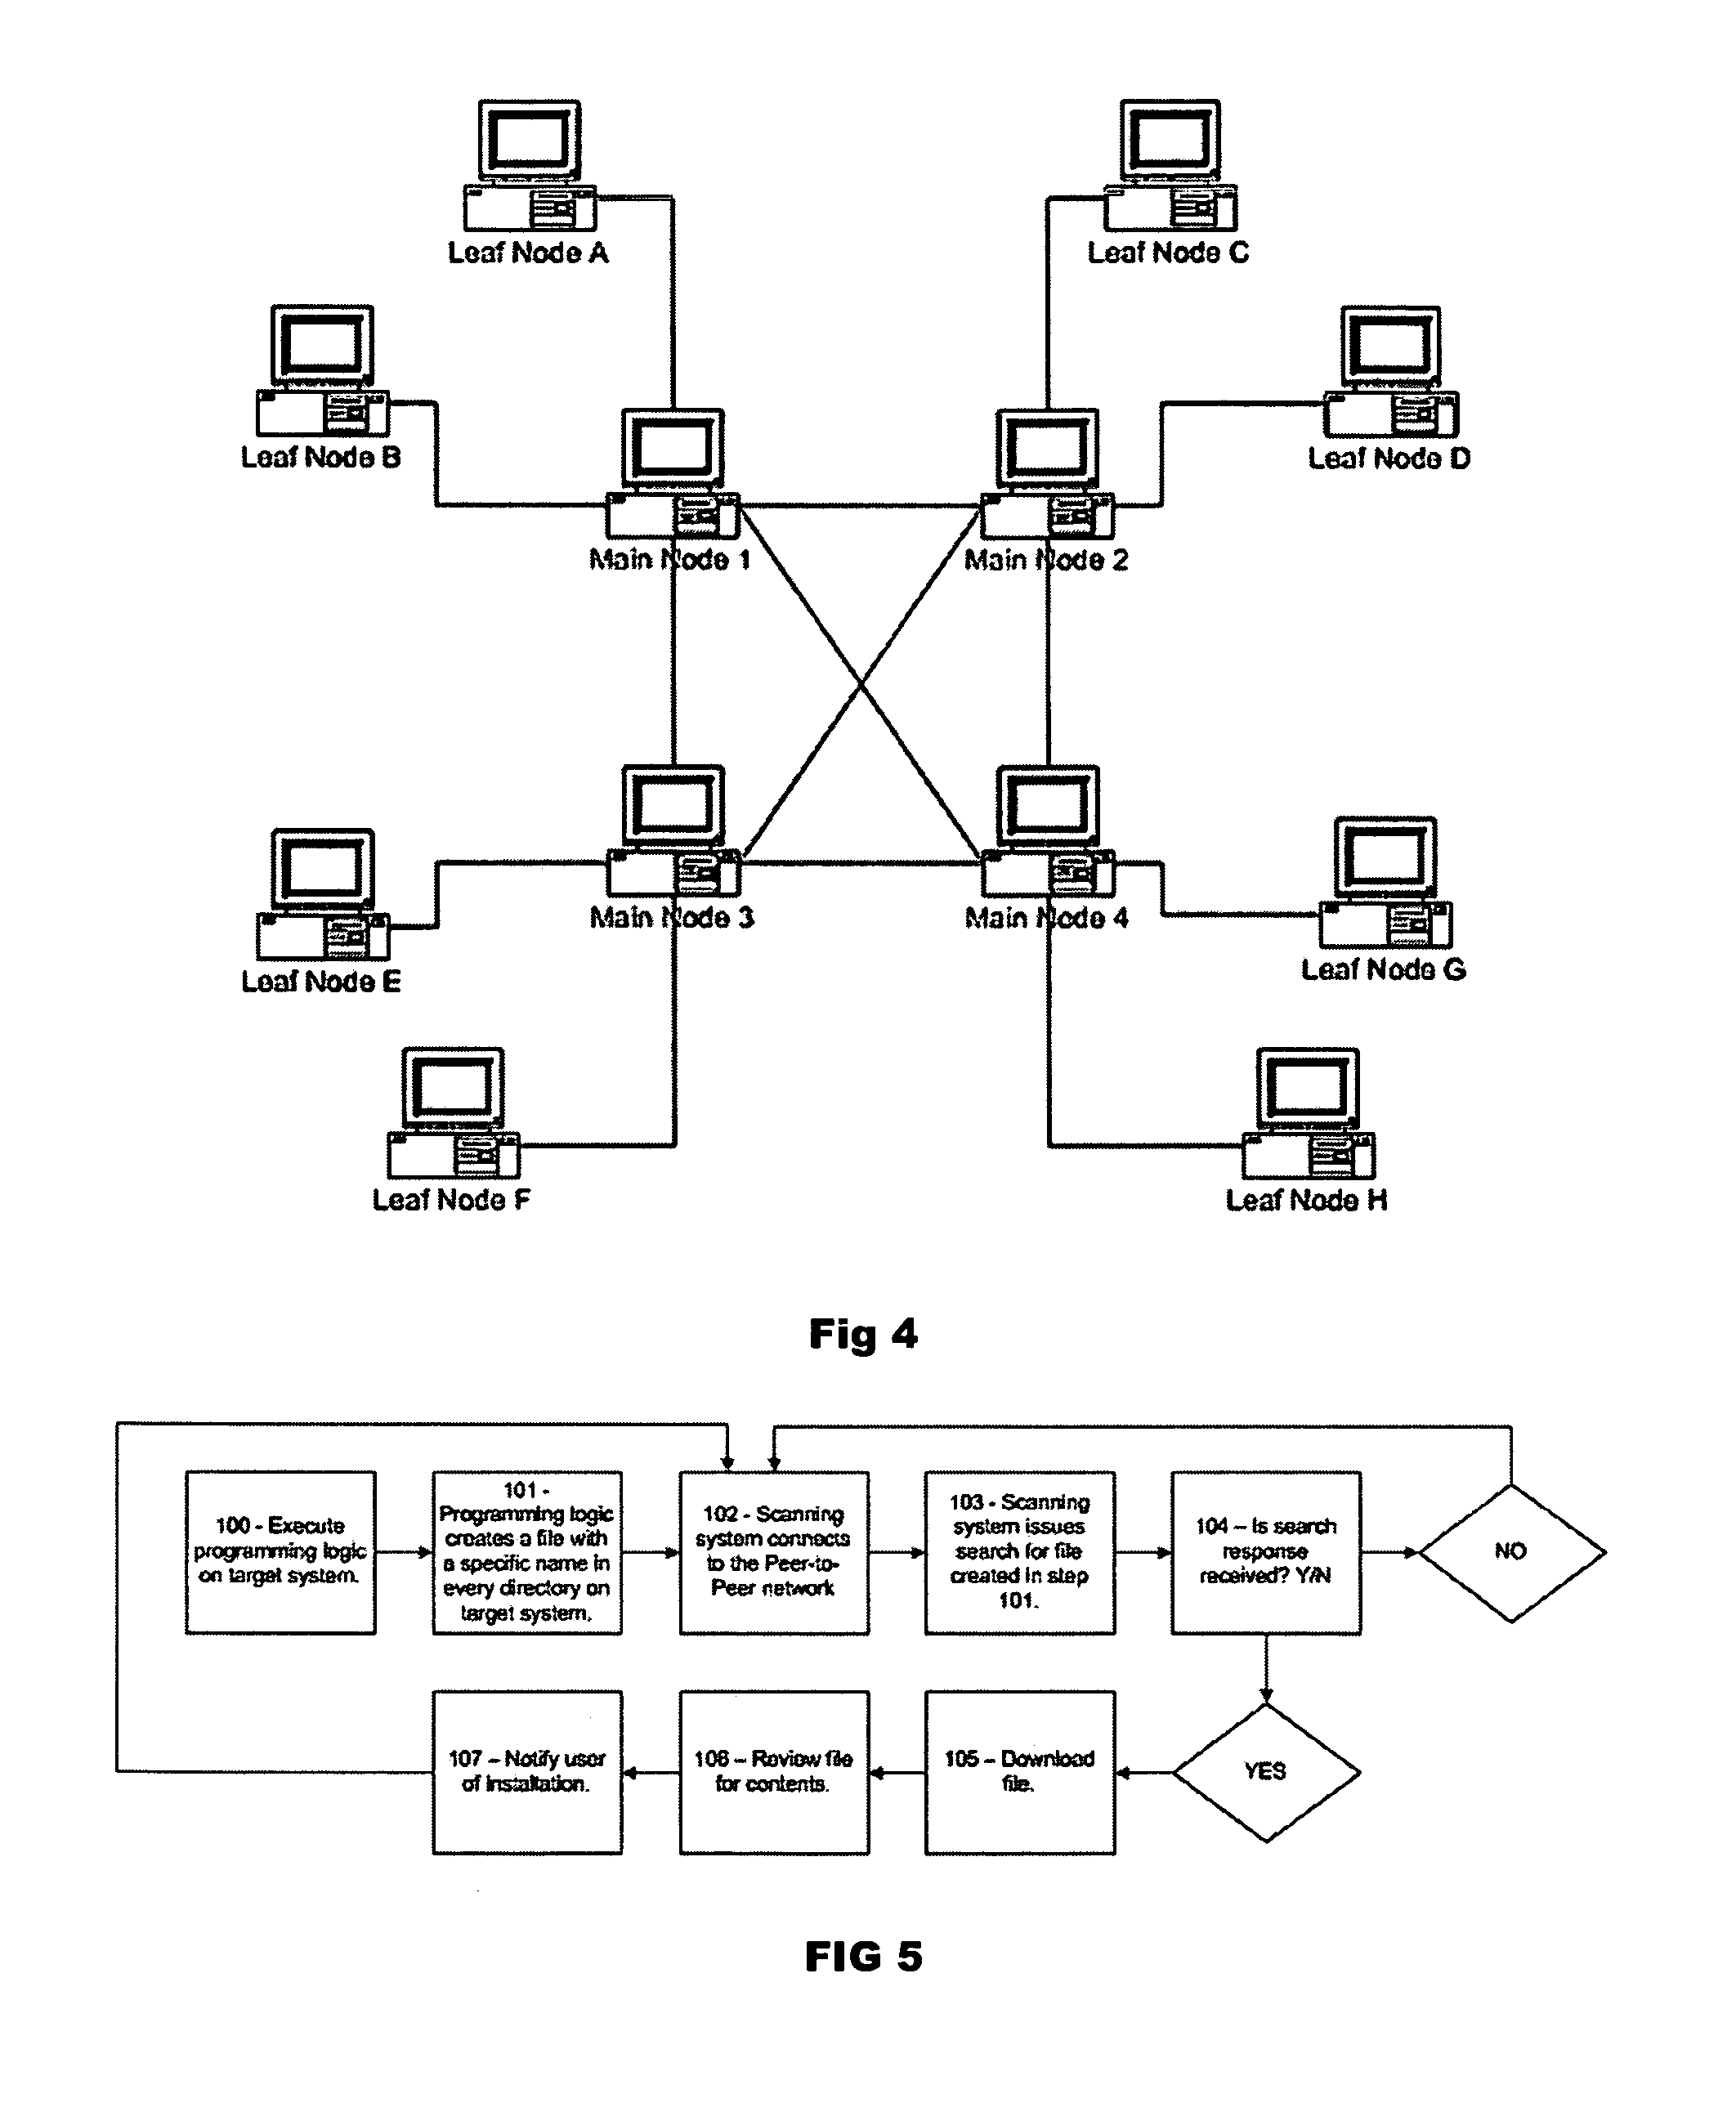 System for identifying the presence of Peer-to-Peer network software applications